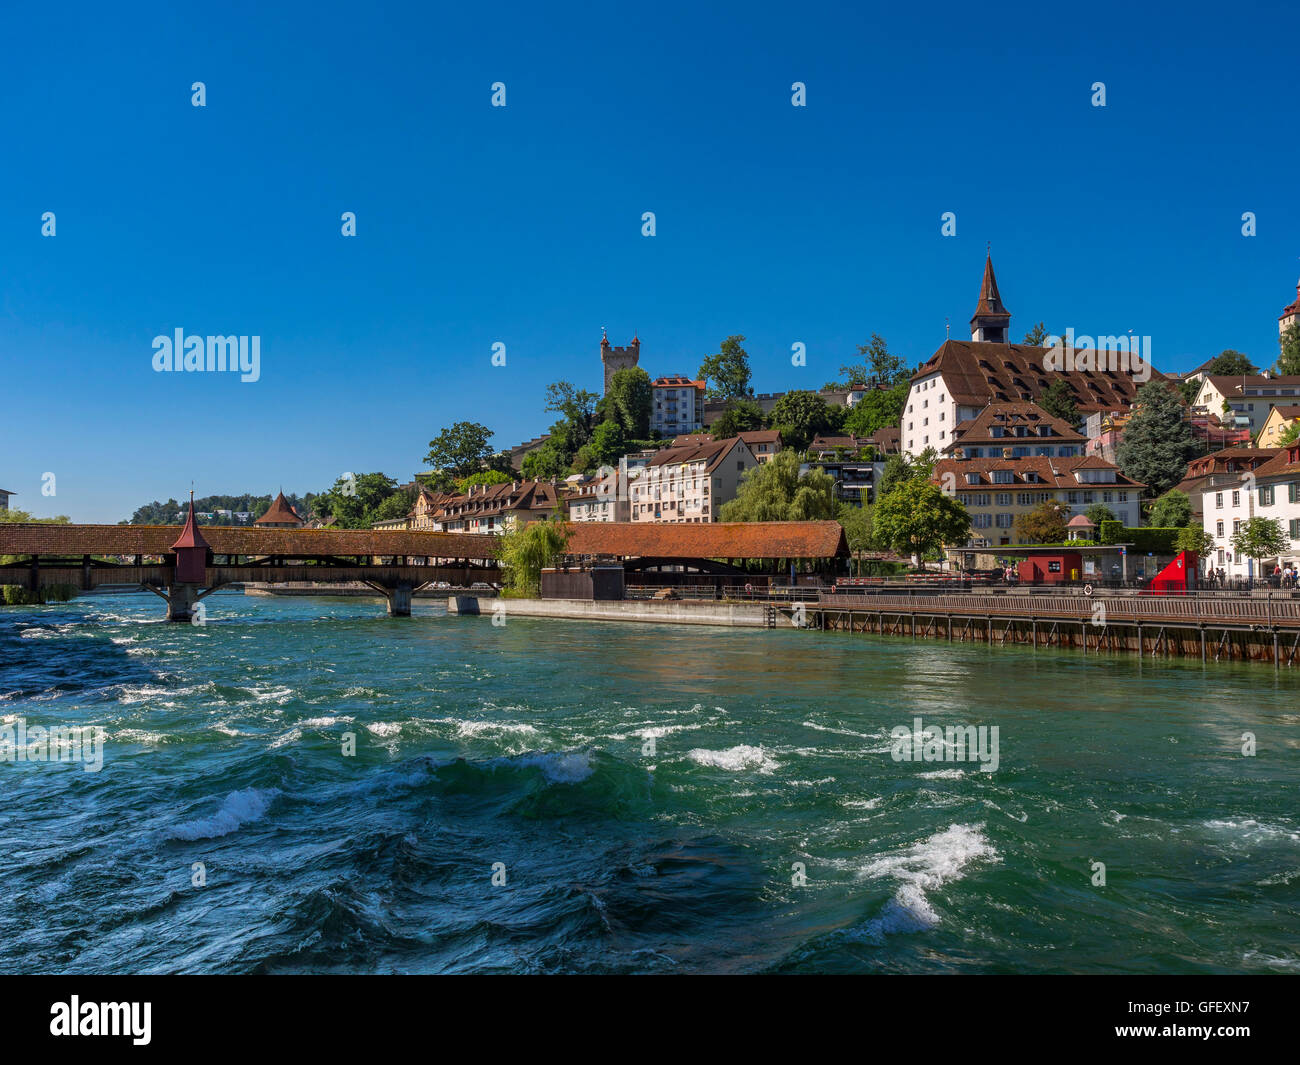 Spreuerbruecke bridge across the Reuss river, leading to the historic disrict of Lucerne, canton of Lucerne, Switzerland, Europe Stock Photo